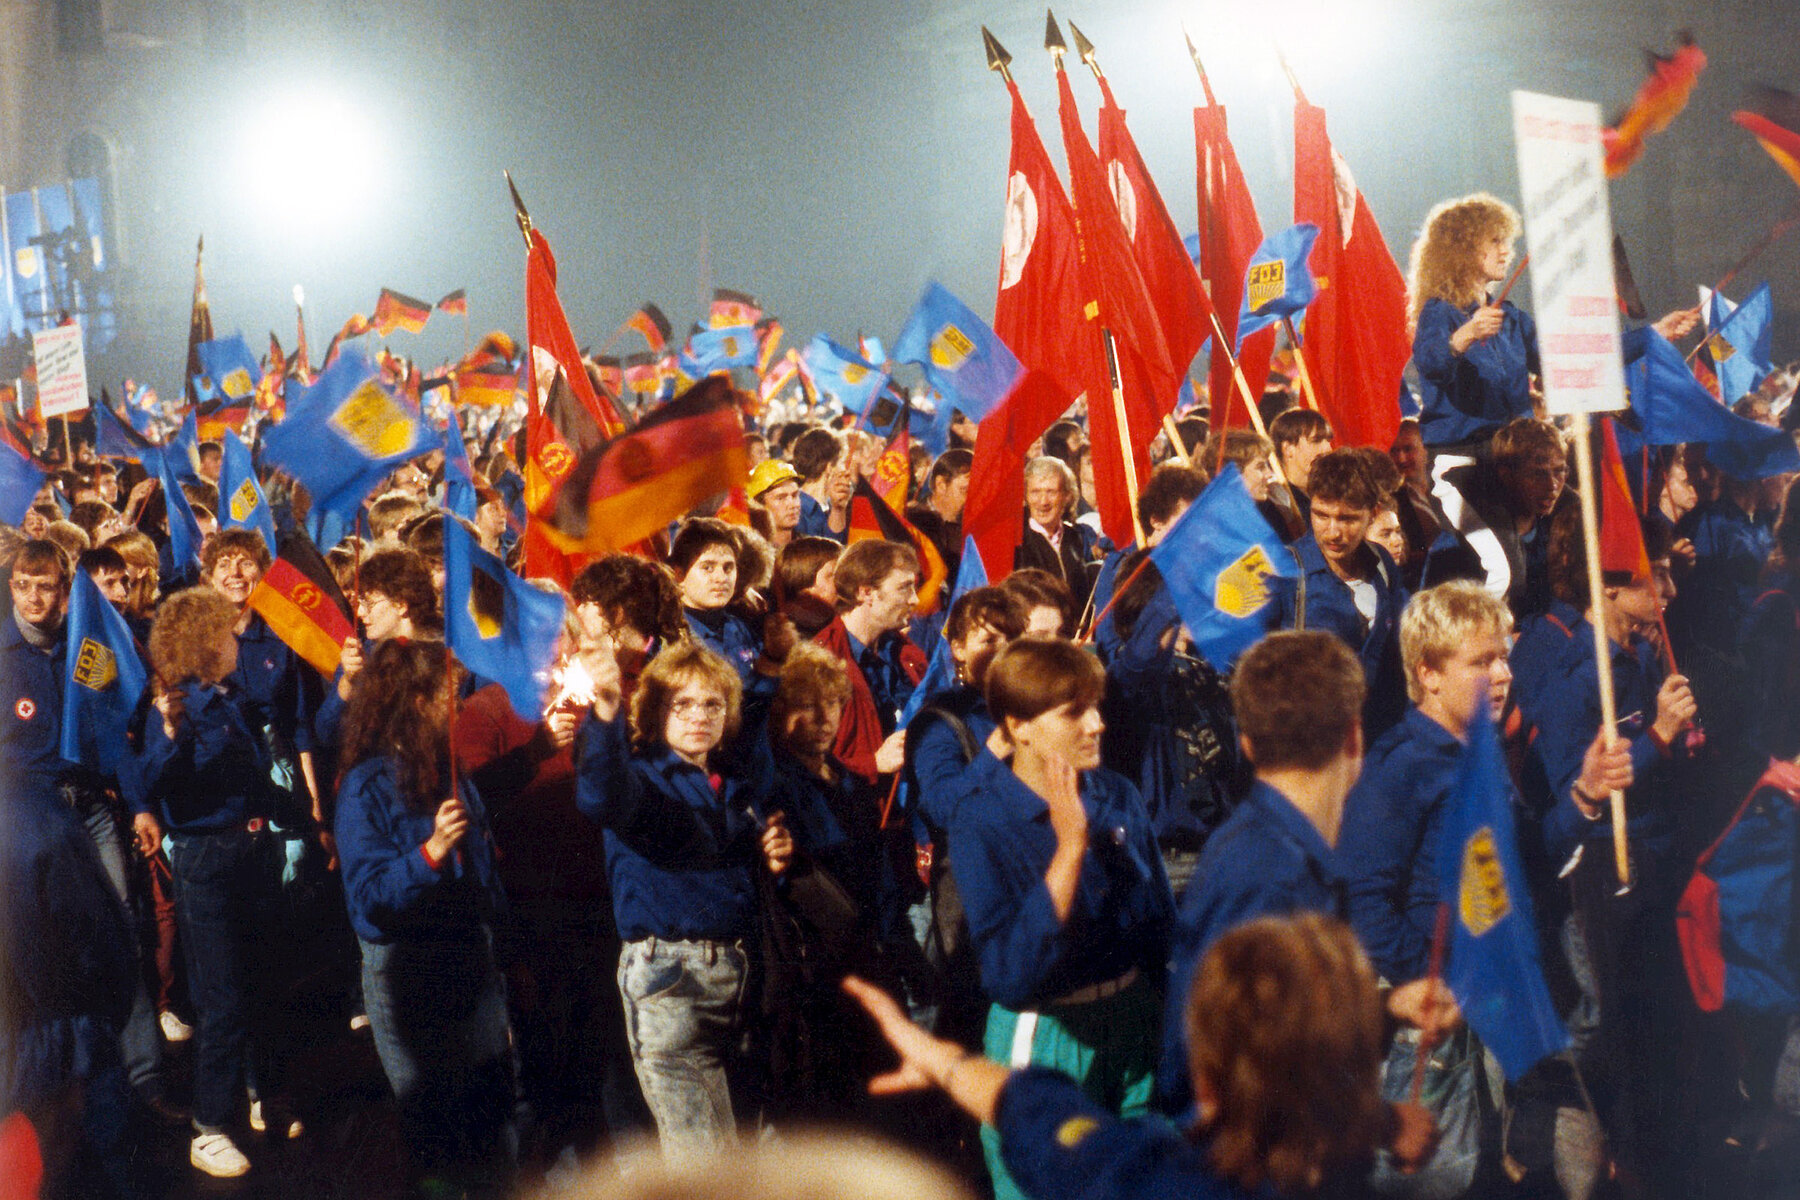 On the 40th anniversary of the GDR, members of the Free German Youth march in blue shirts and with red flags on the street Unter den Linden.